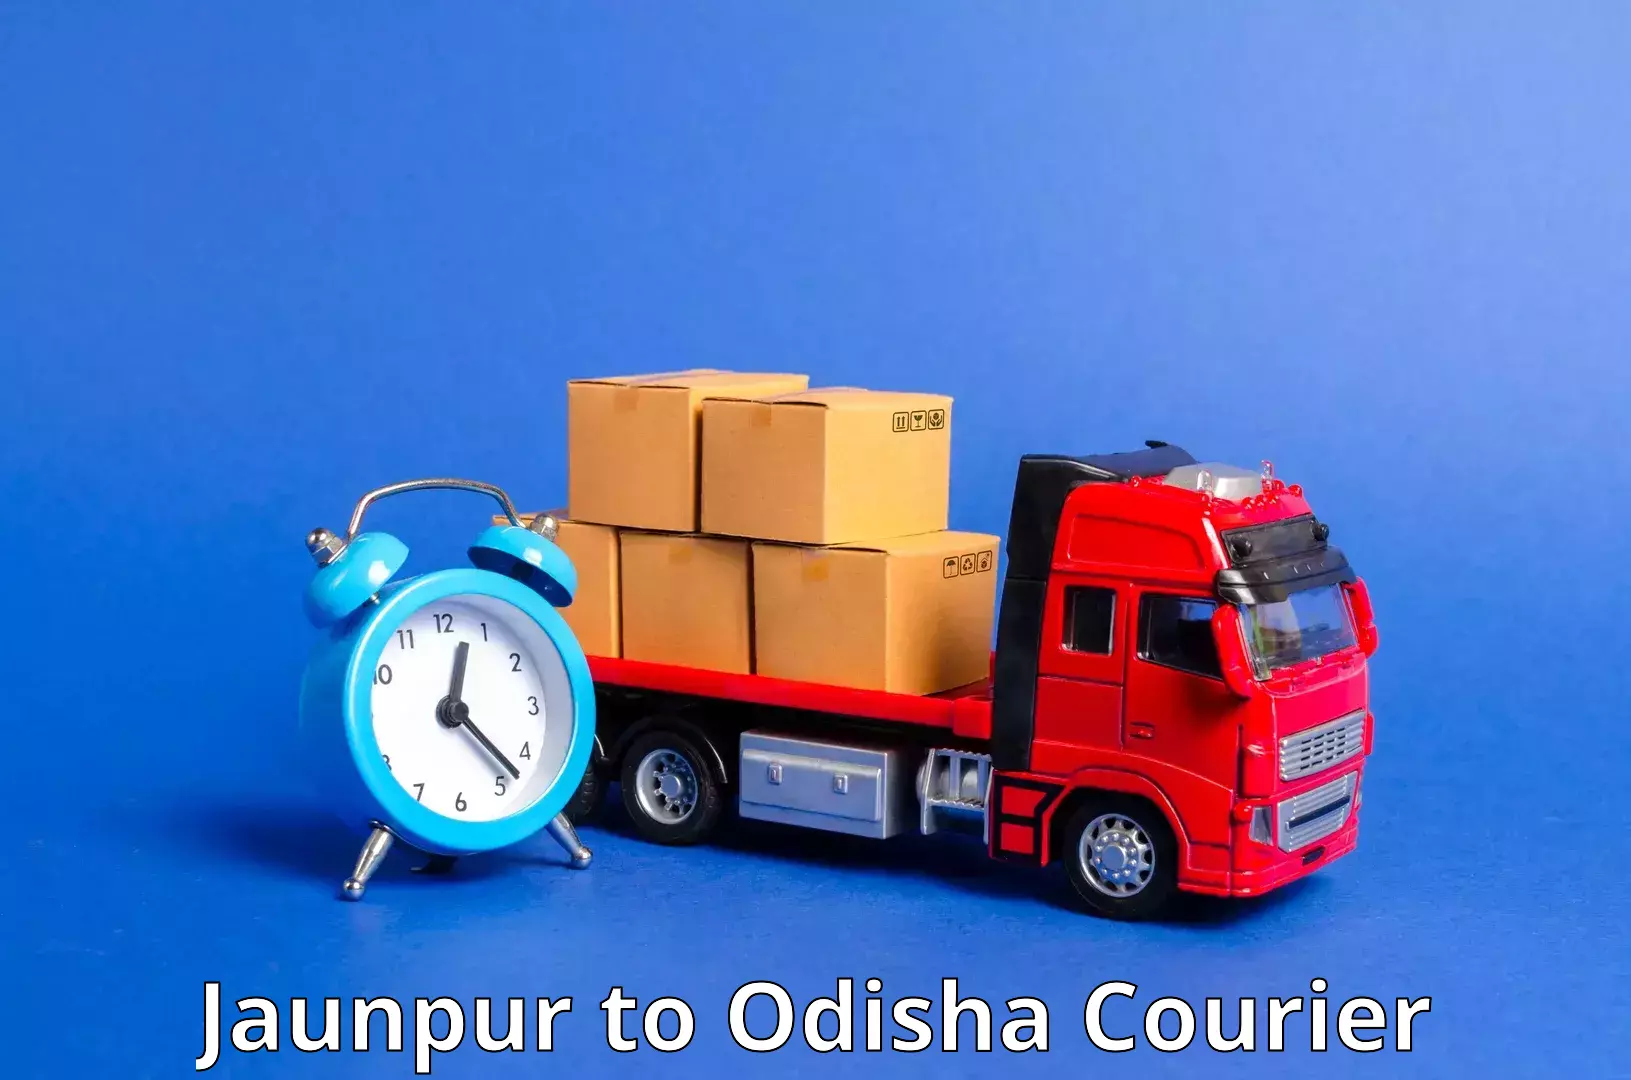 Delivery service partnership Jaunpur to Chandinchowk